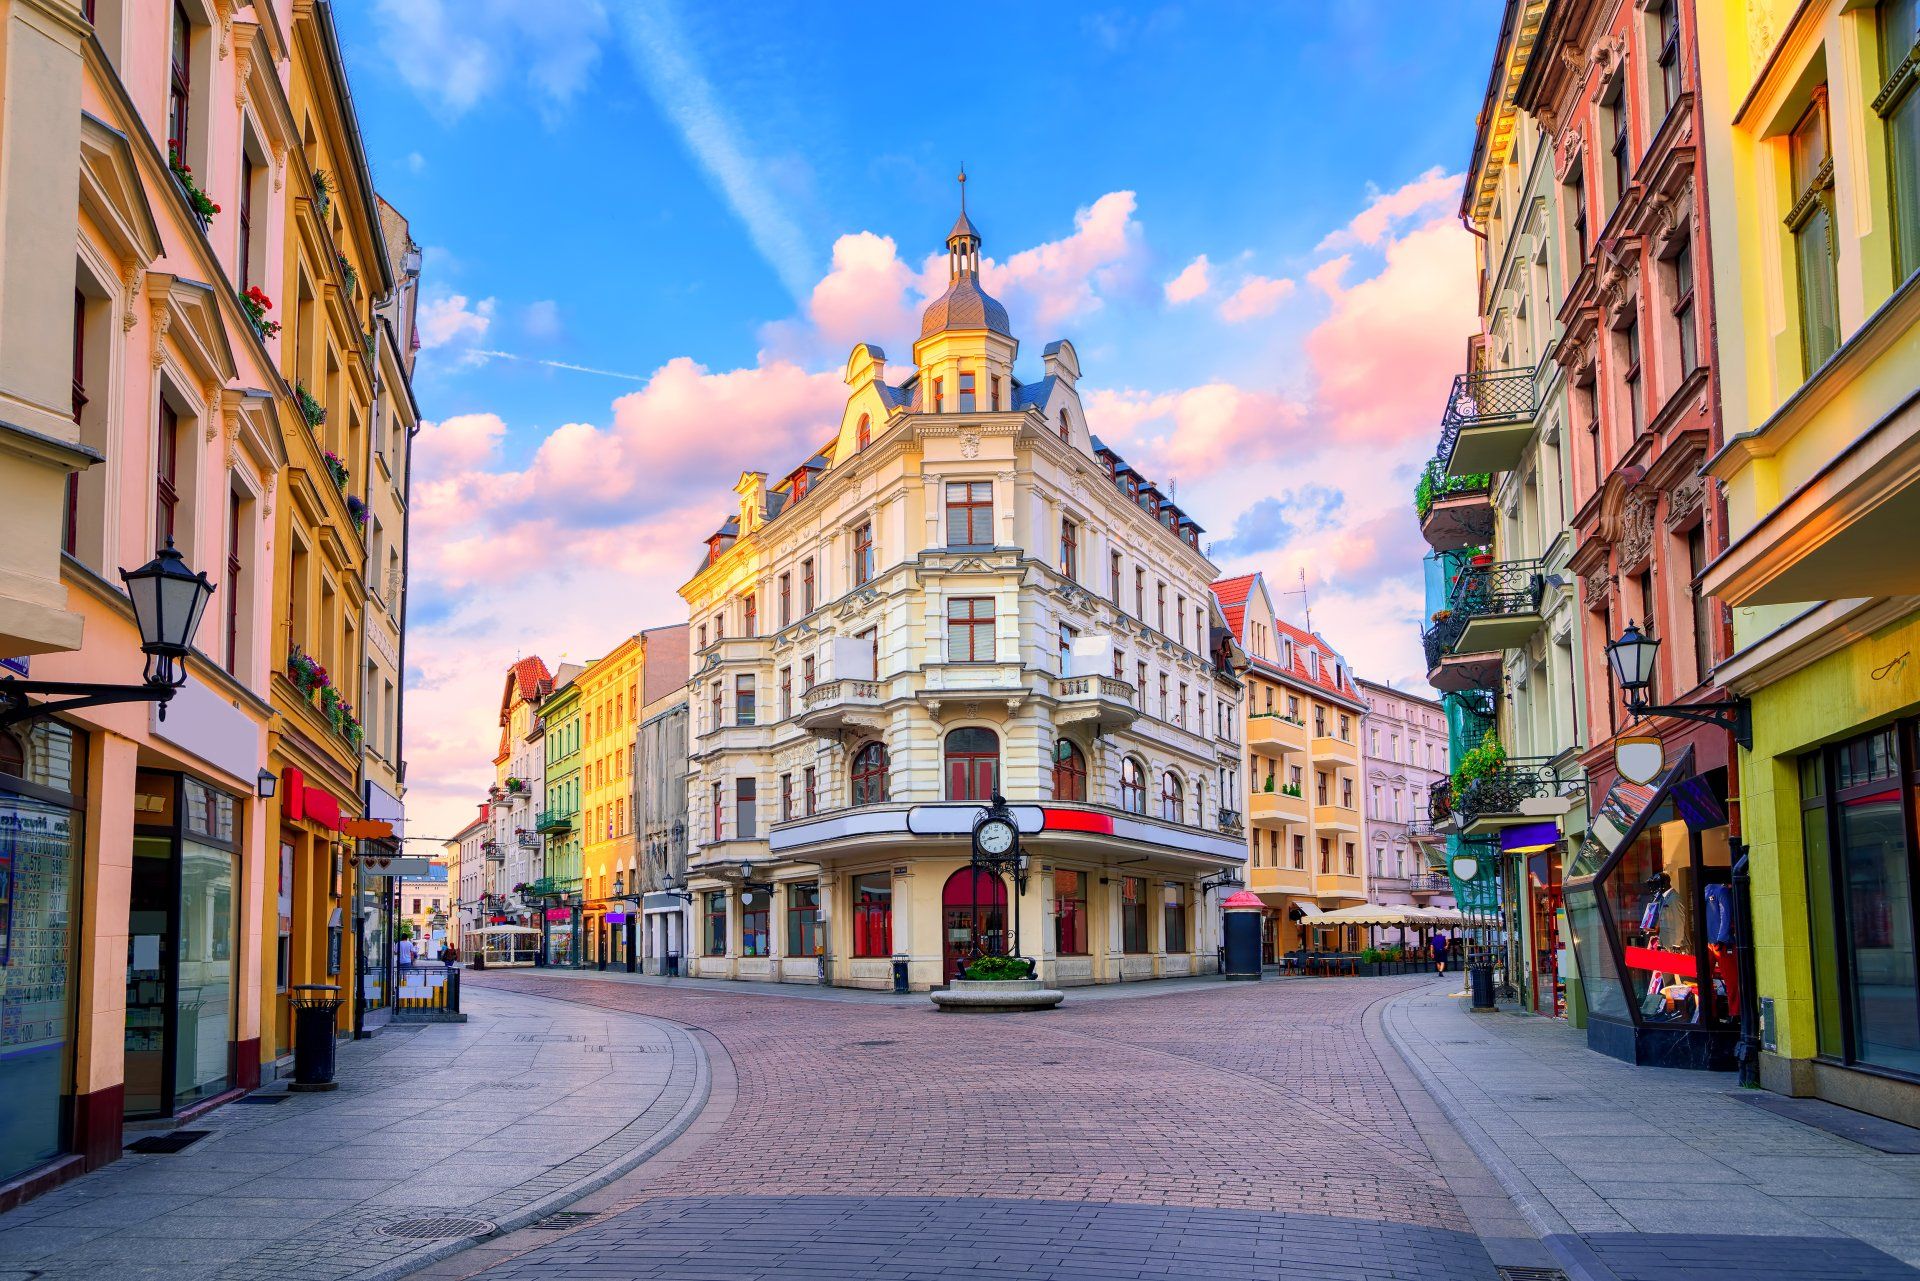 Man made city poland architecture square building wallpaper old town square best places to live old town